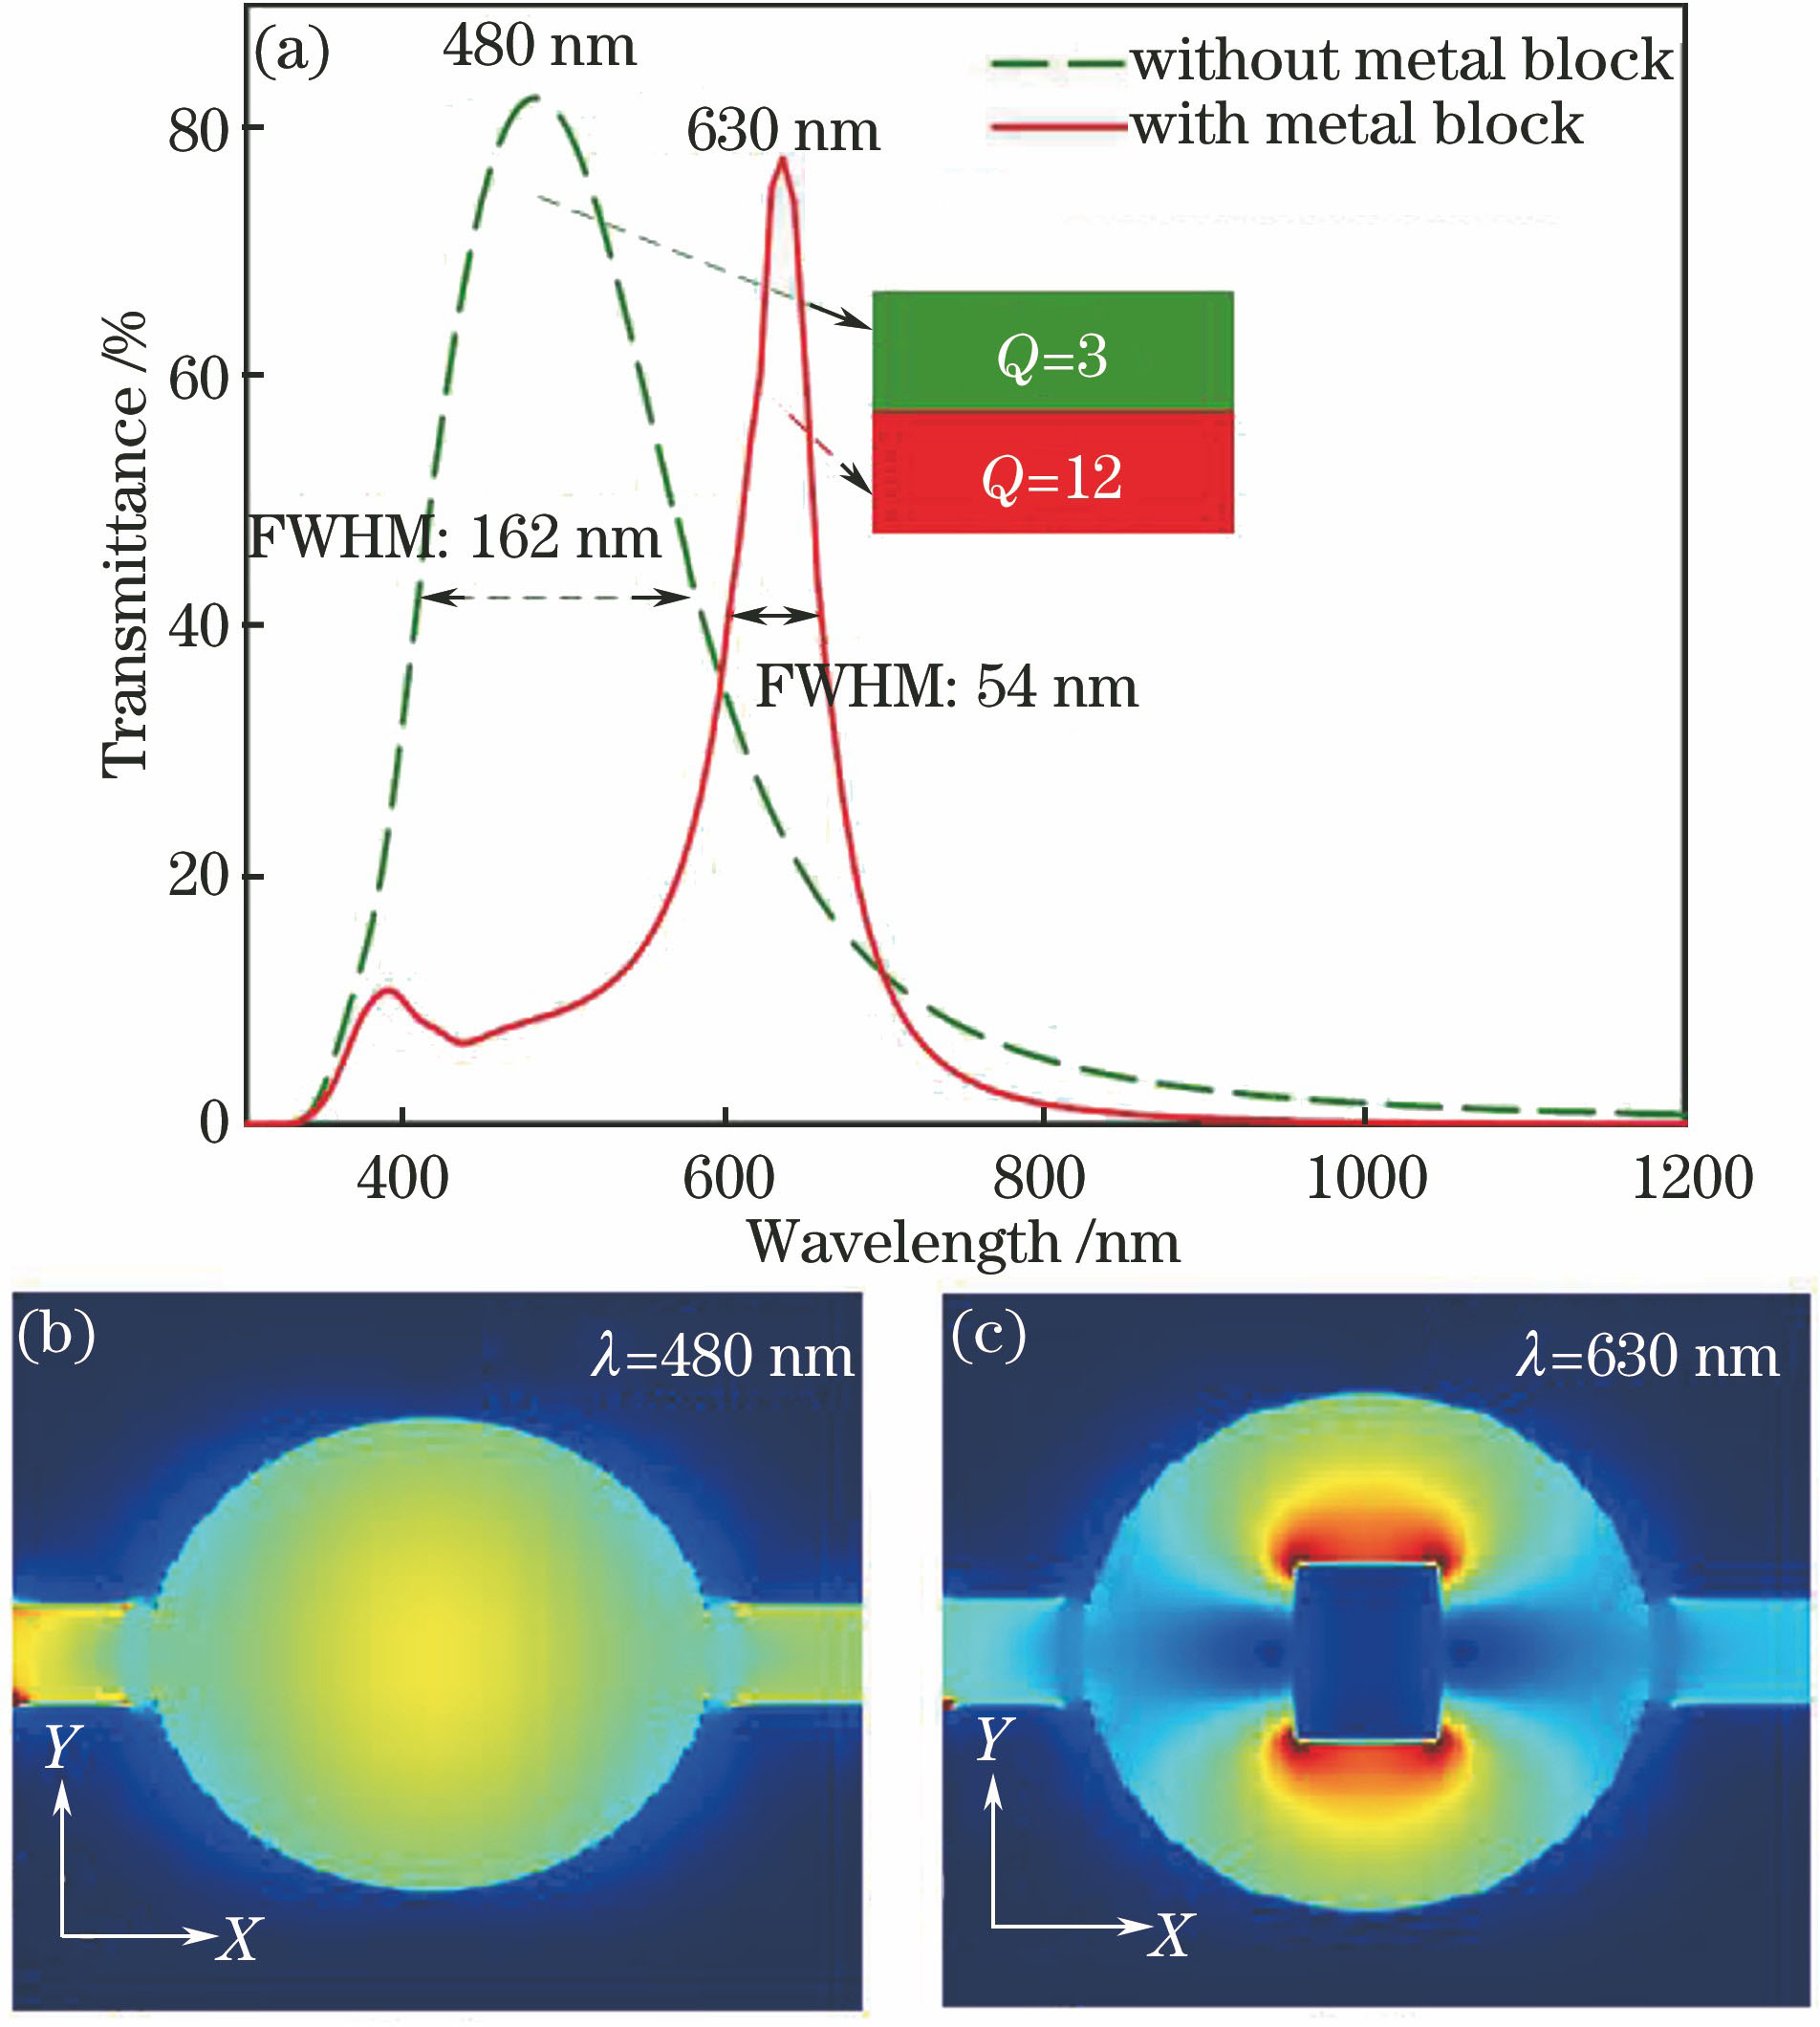 Two kinds of disk resonator filters with or without embedded rectangular metal block. (a) Transmission spectra; electric field energy density distribution at (b) 480 nm and (c) 630 nm resonant wavelengths